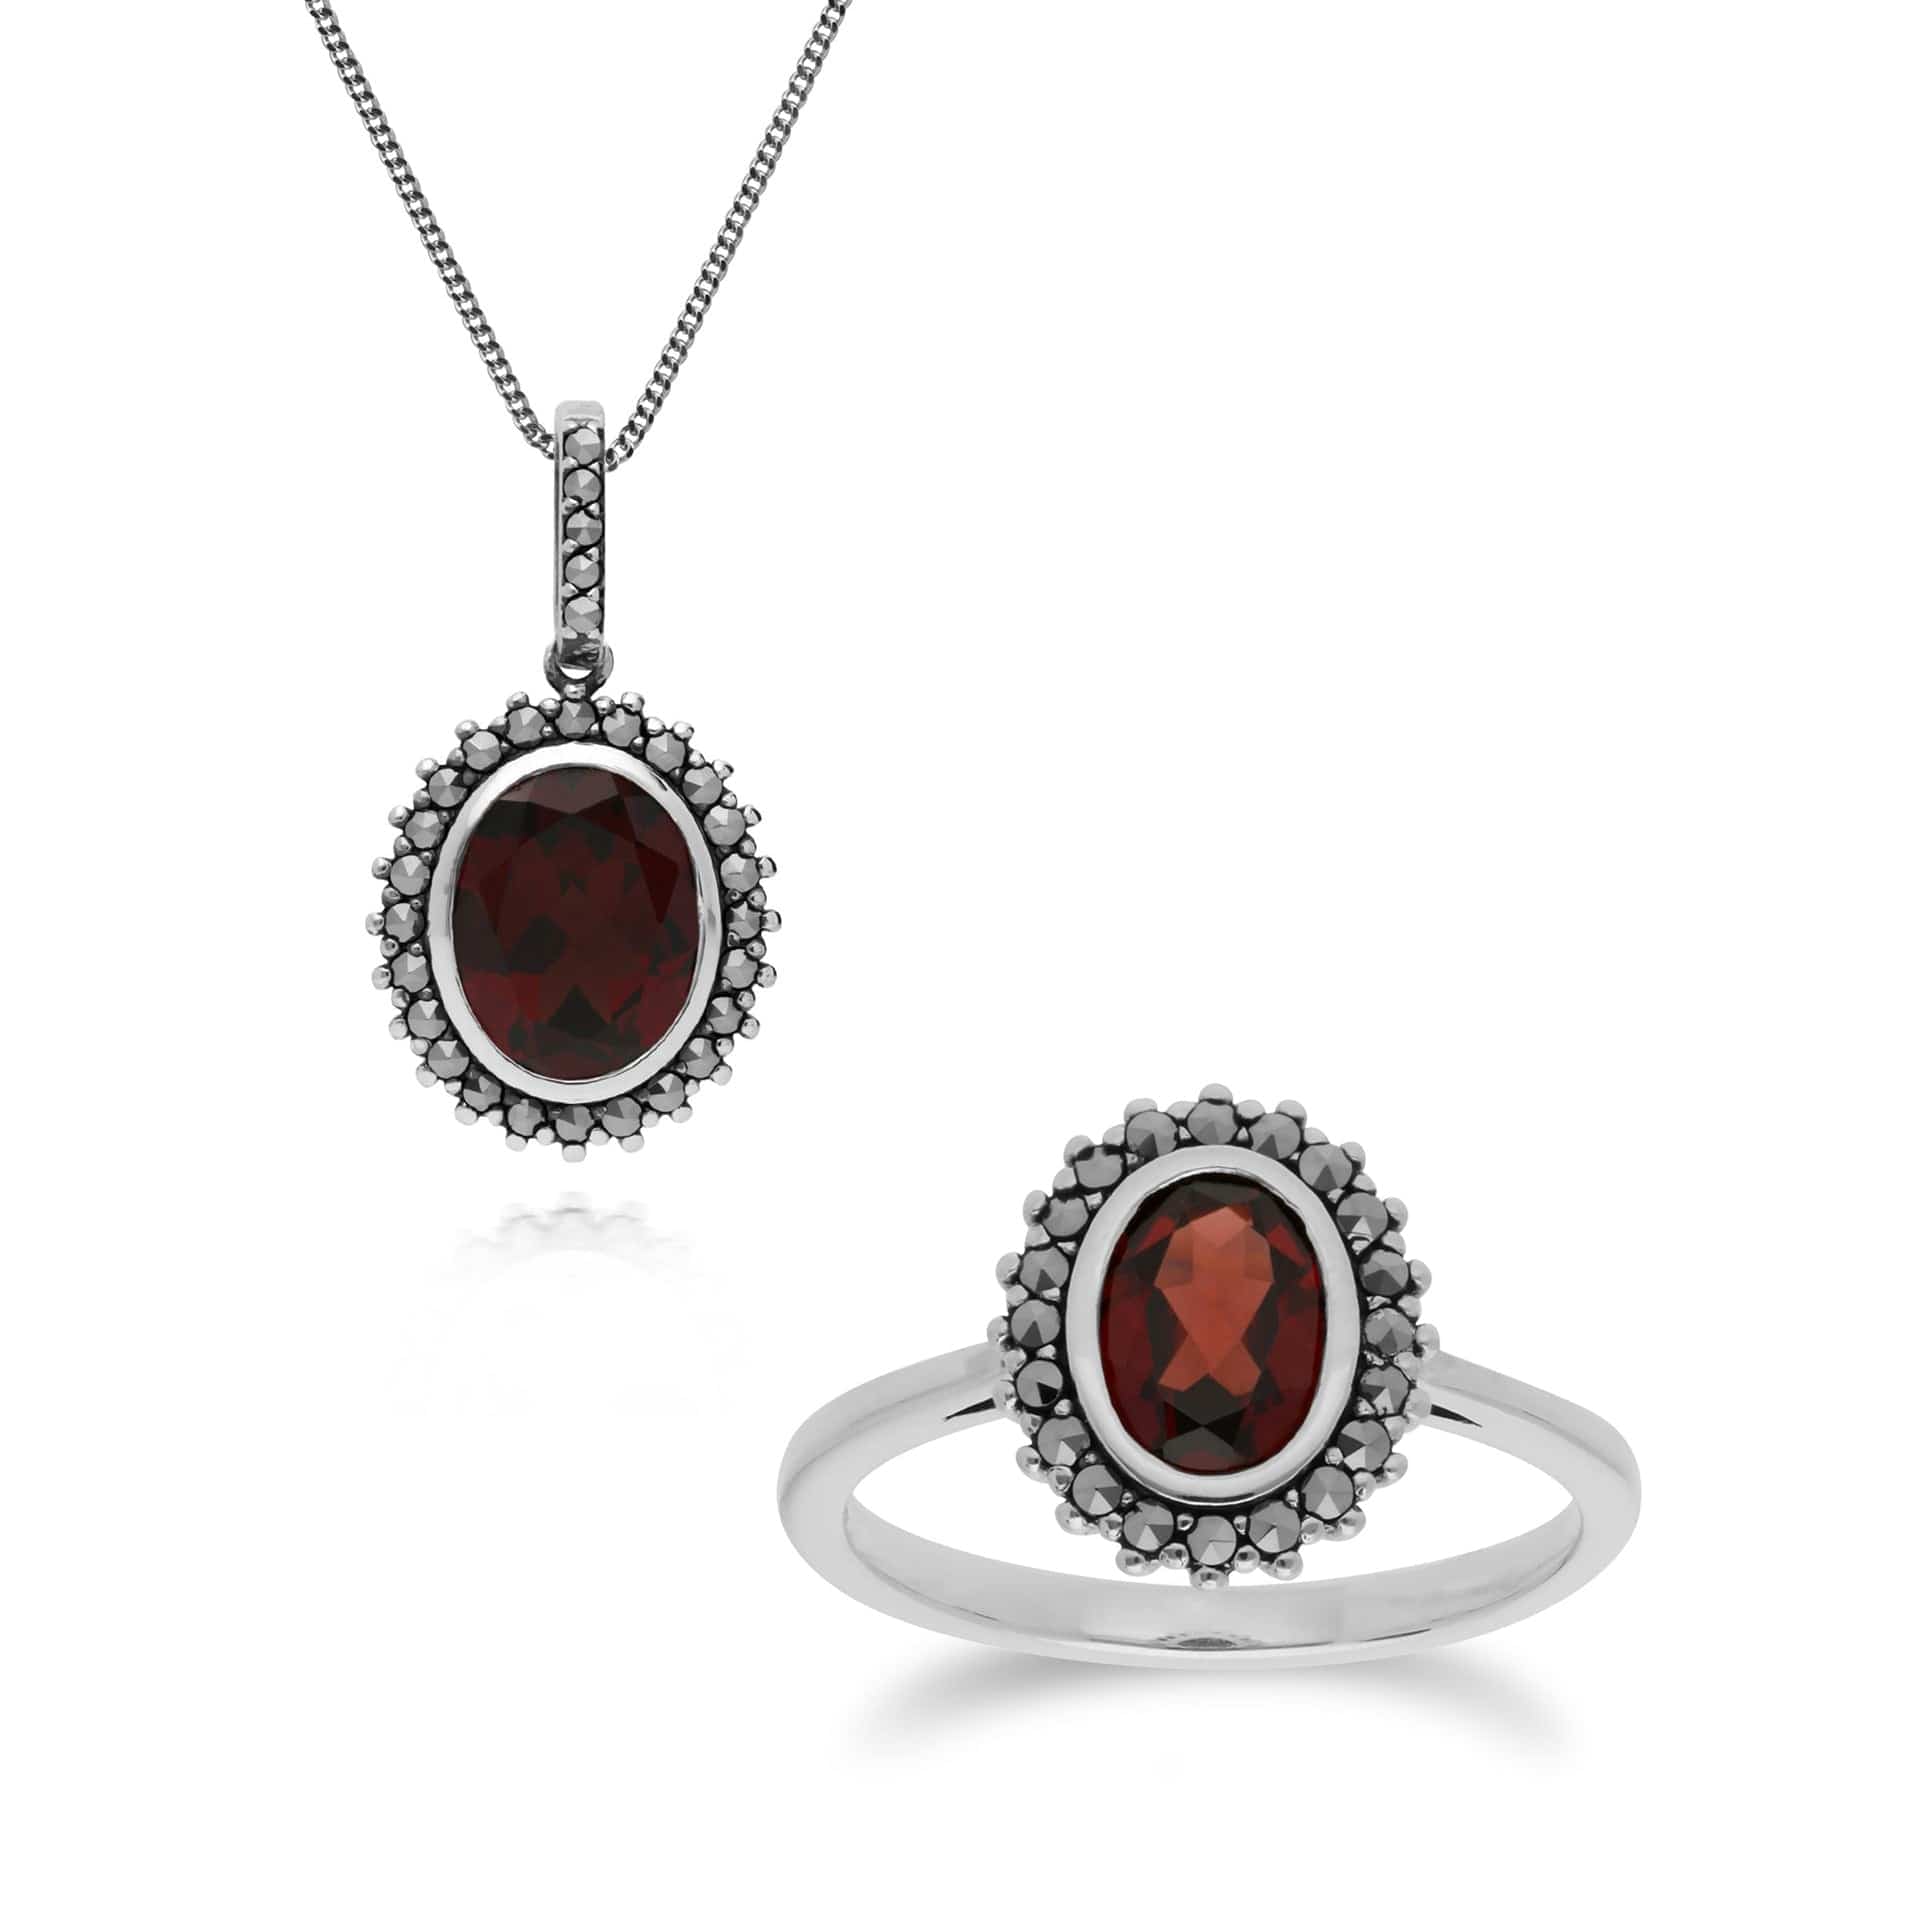 214P301403925-214R599703925 Art Deco Style Oval Garnet & Marcasite Halo Pendant & Ring Set in 925 Sterling Silver 1